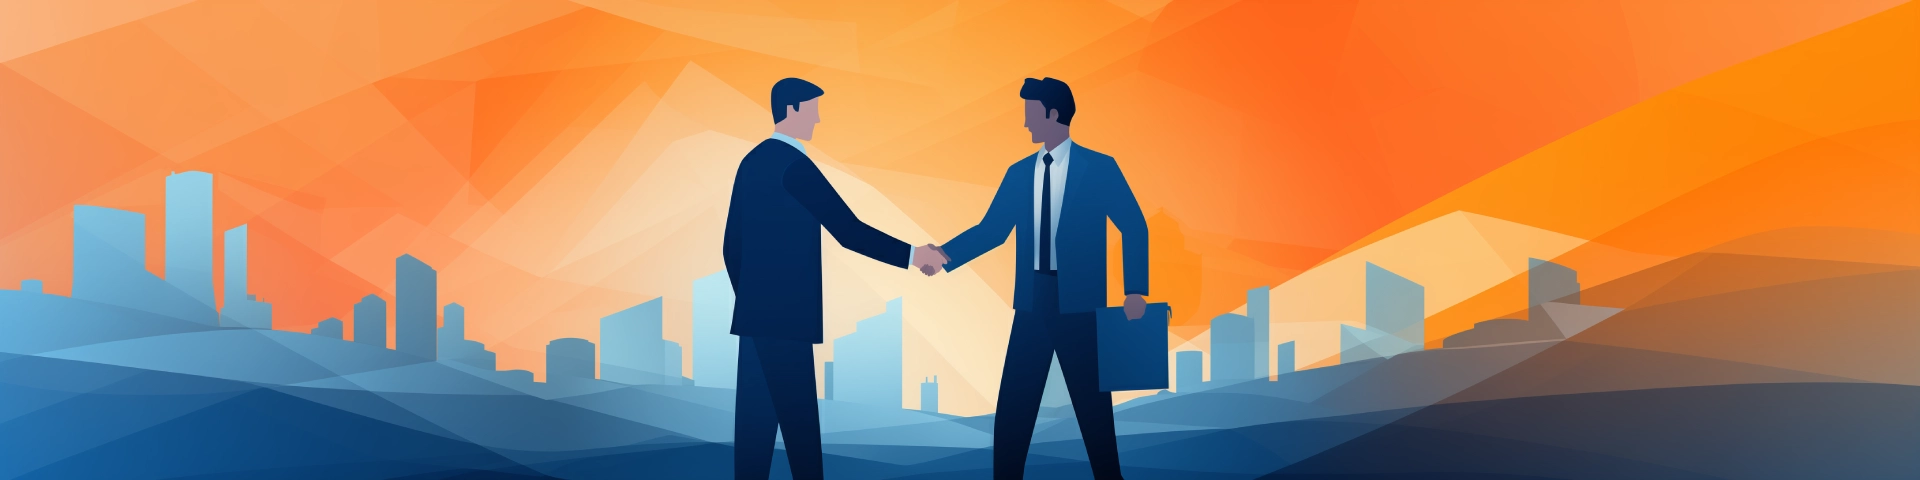 Two people shaking hands cartoon drawn